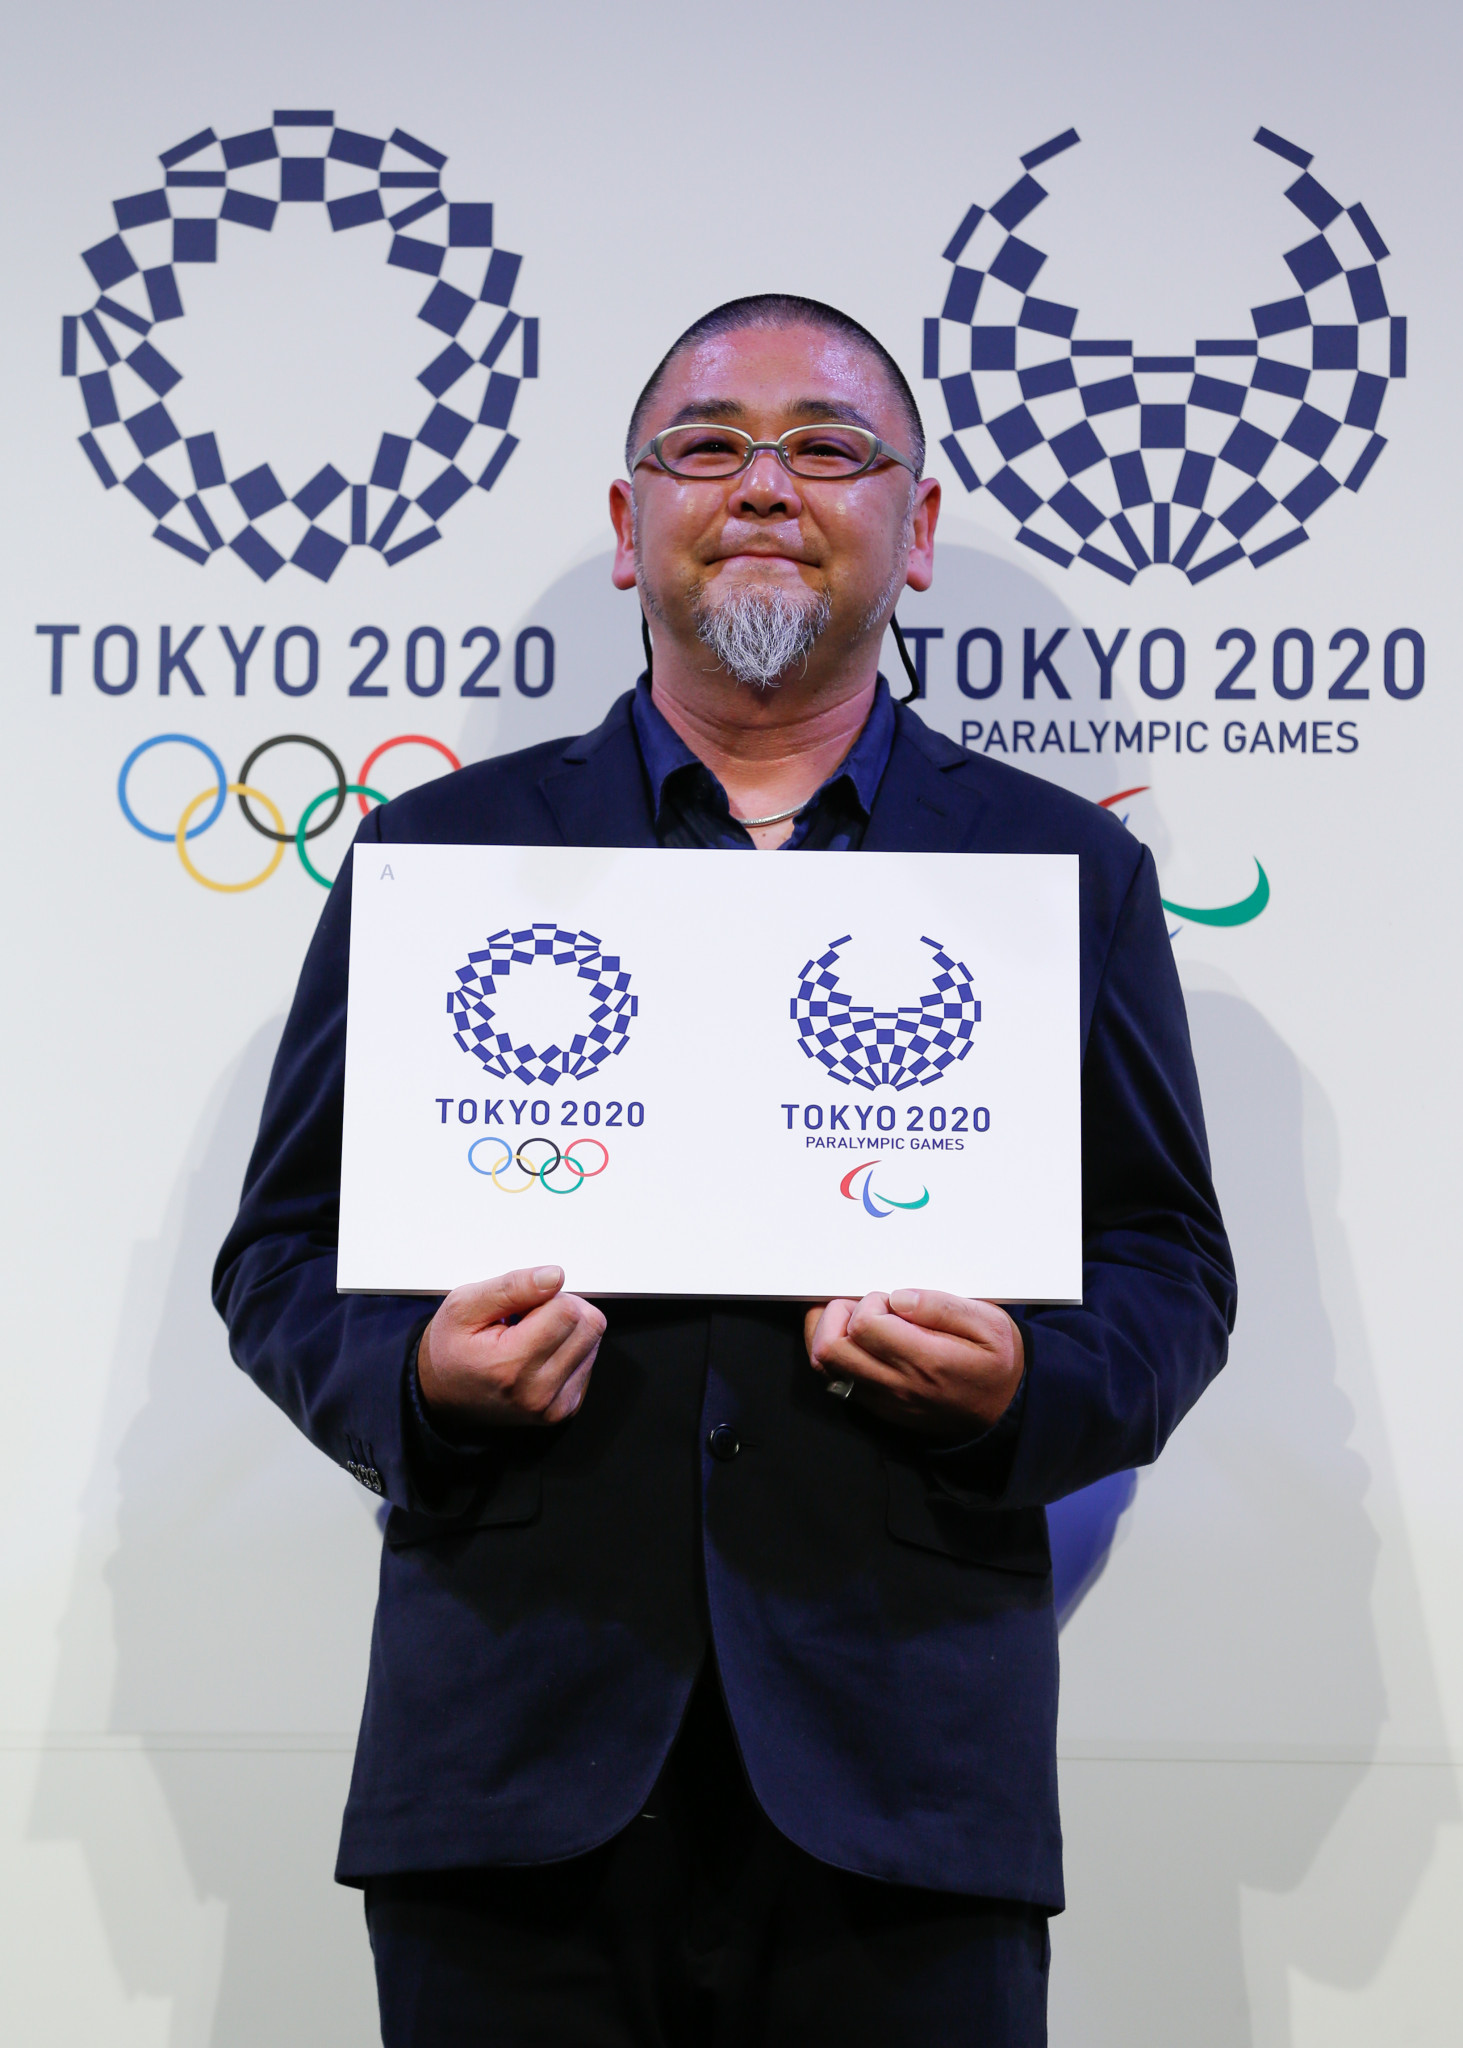 Asao Tokolo, the Japanese artist who designed the Tokyo 2020 emblems, will provide two pieces of work ©Getty Images